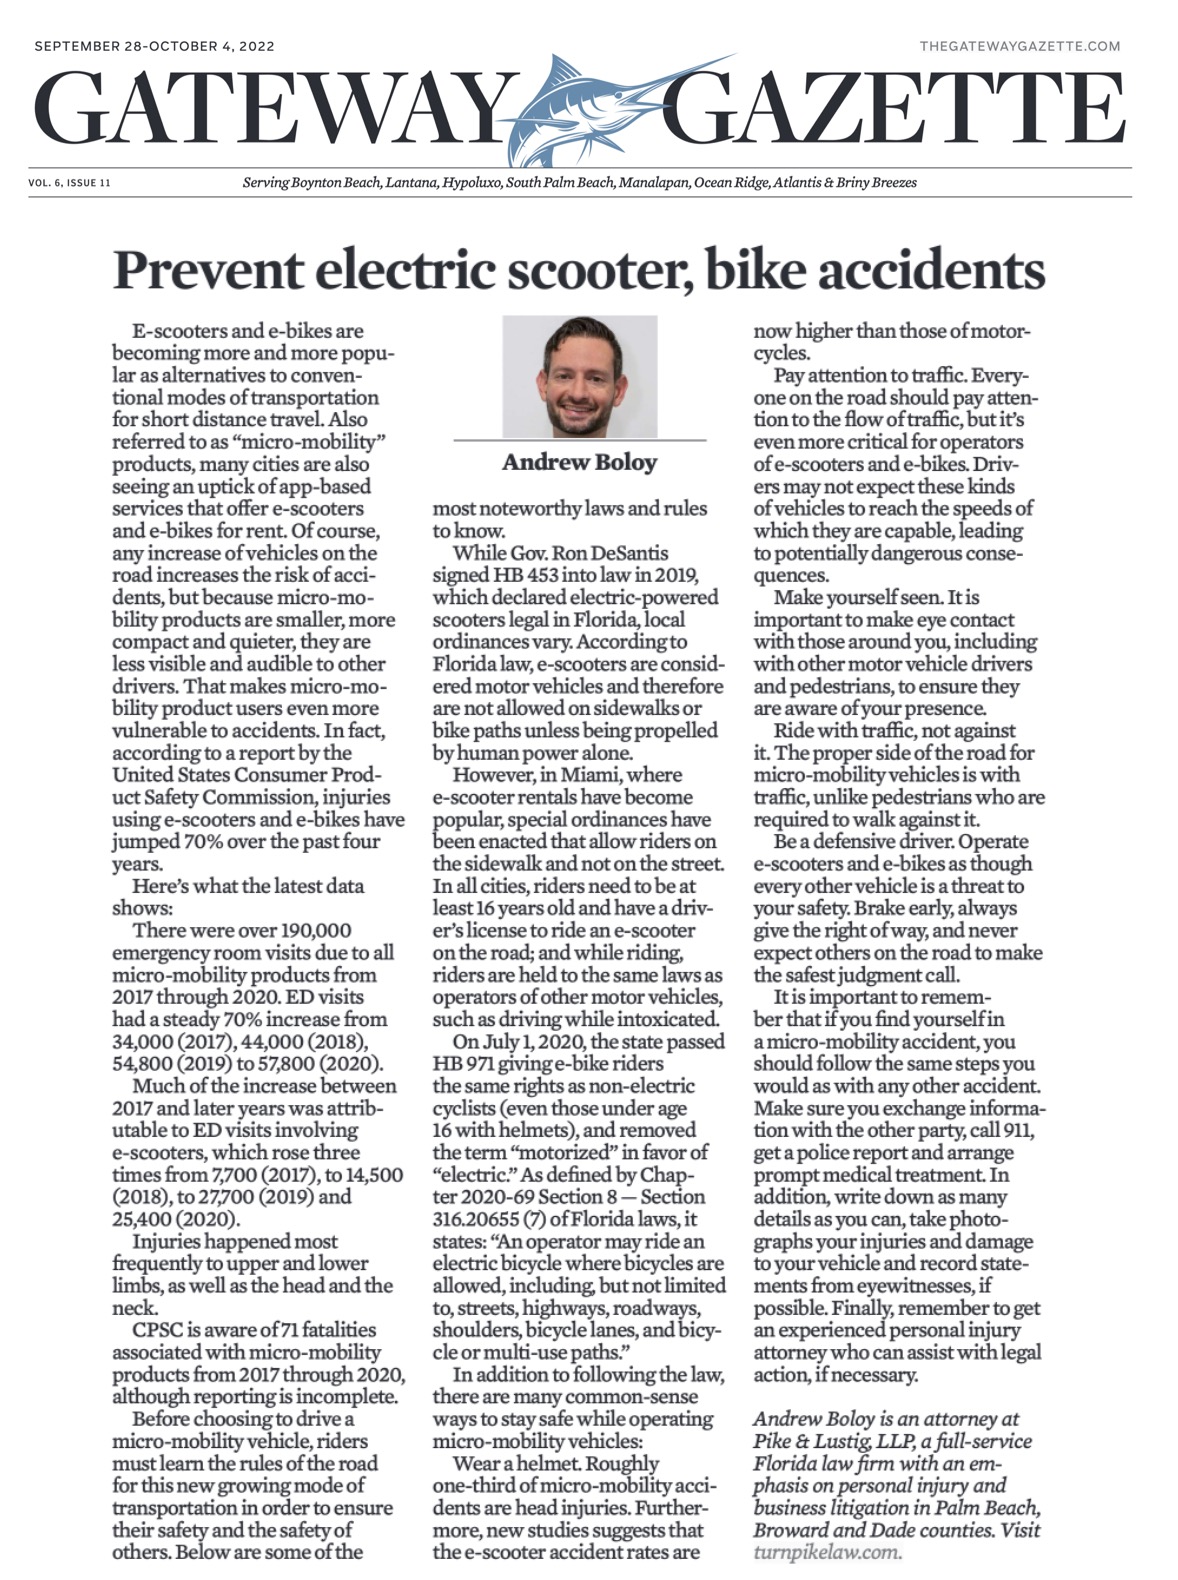 Prevent electric scooter, bike accidents